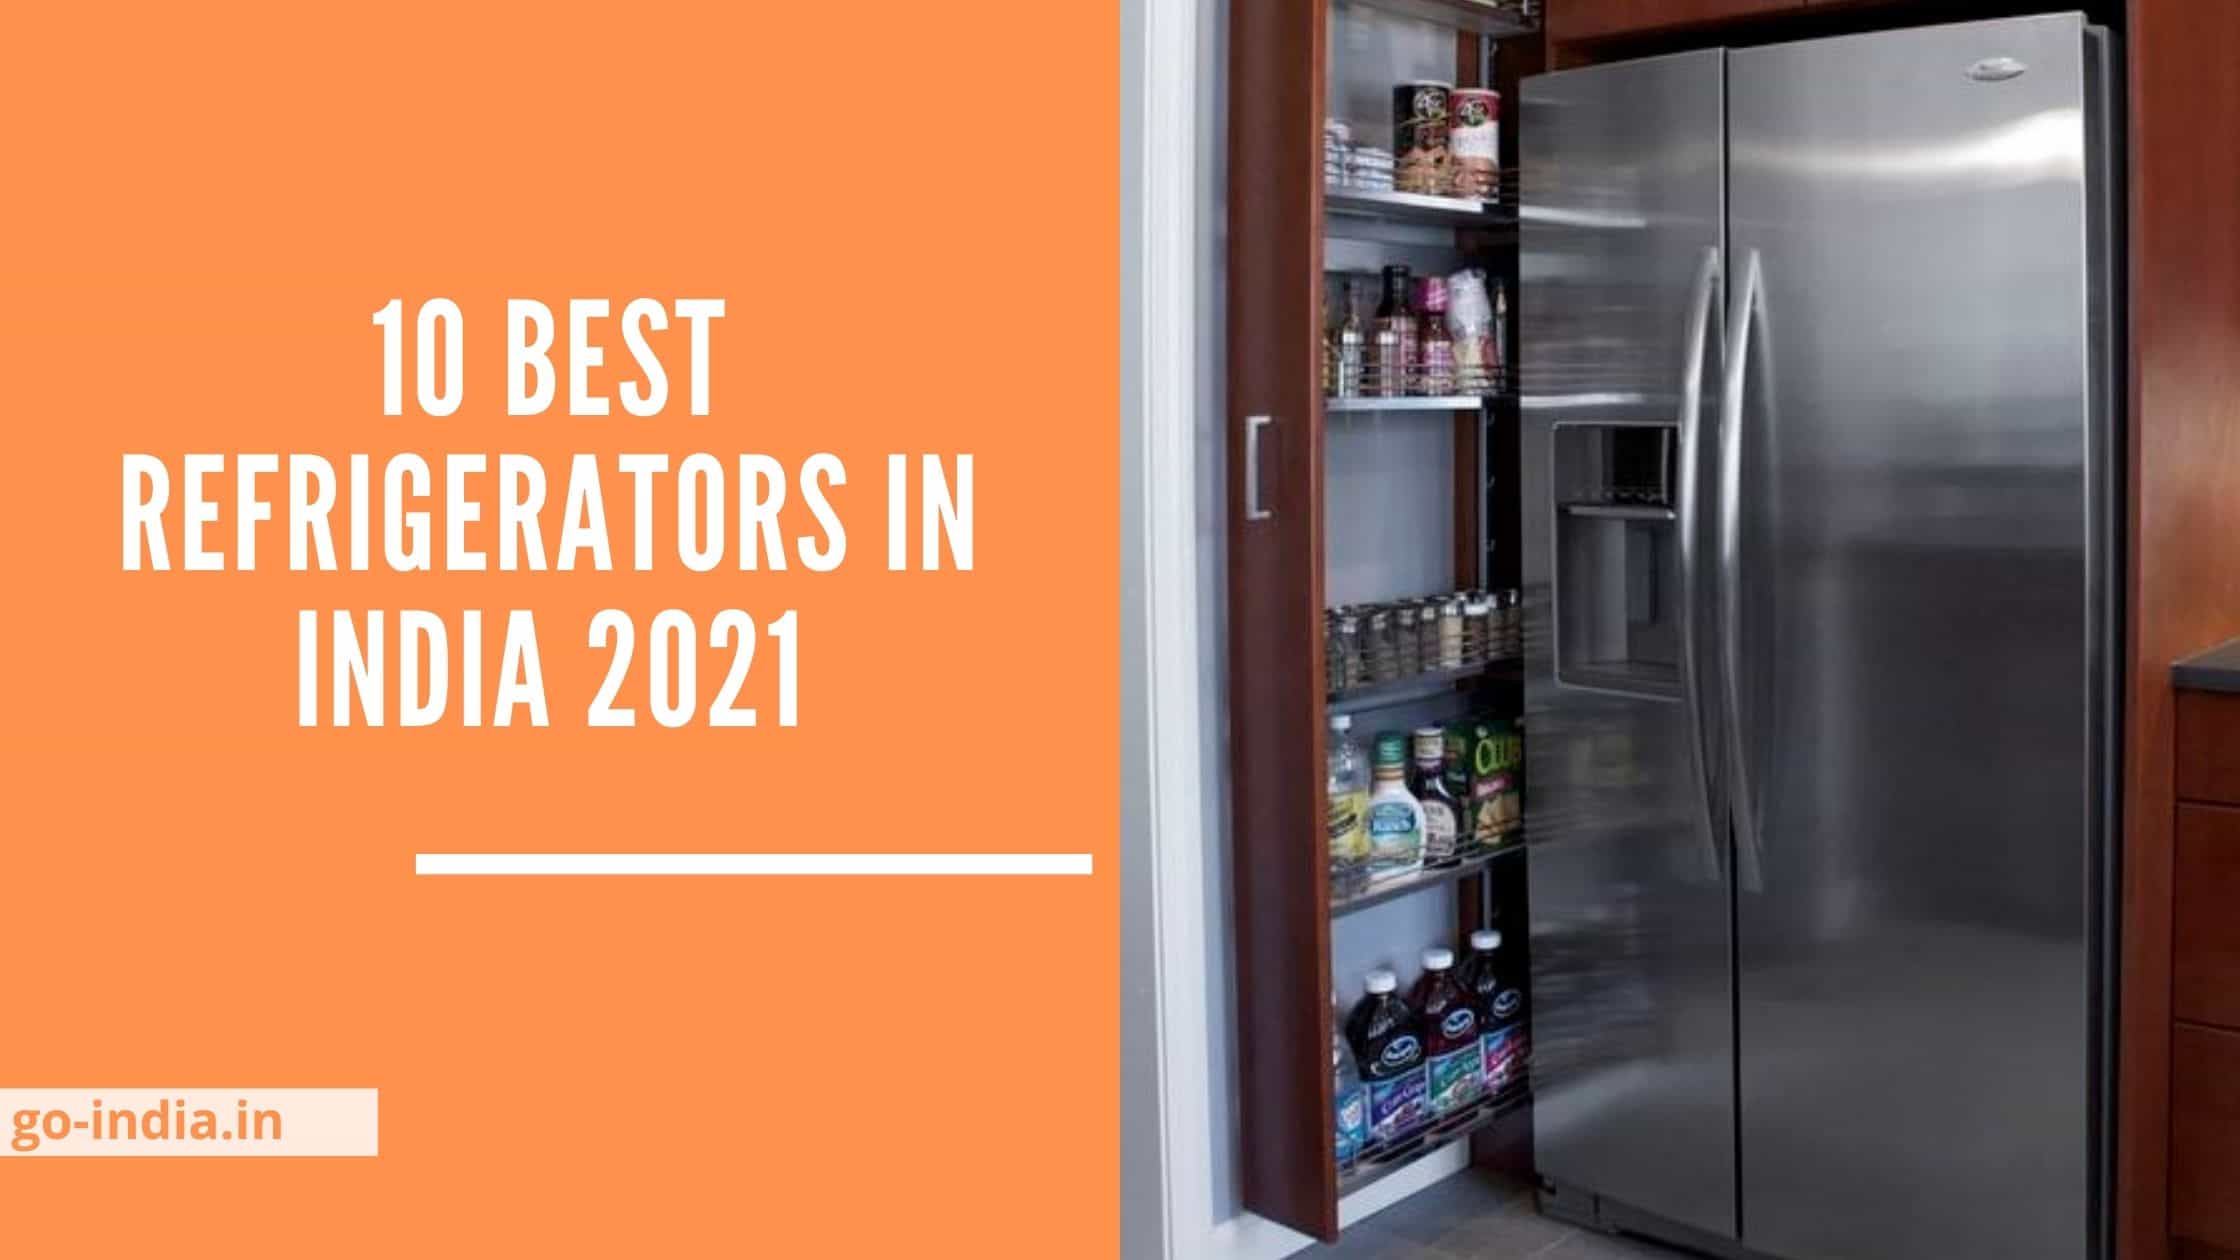 10 Best Refrigerators in India 2021 Buyer’s Guide & Reviews Go India